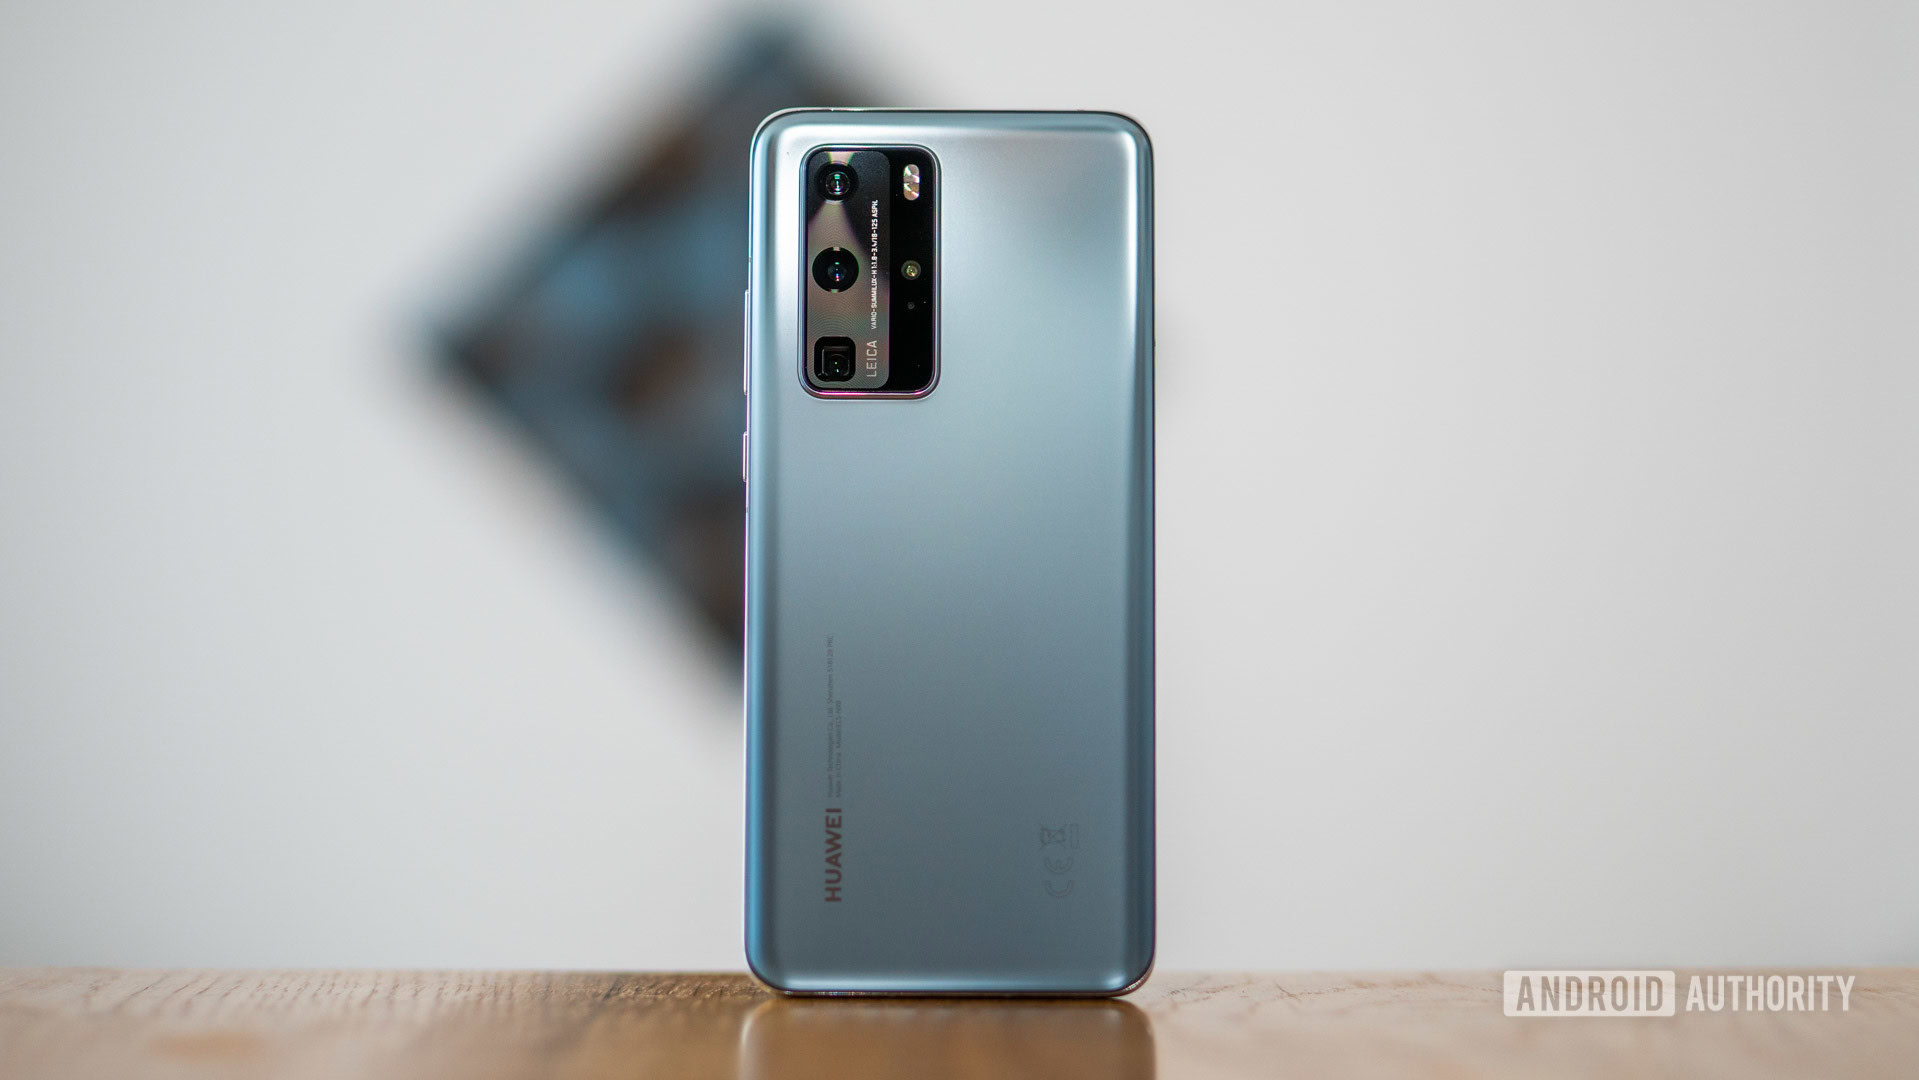 HUAWEI P40 Pro review: Refinement done right - Android Authority